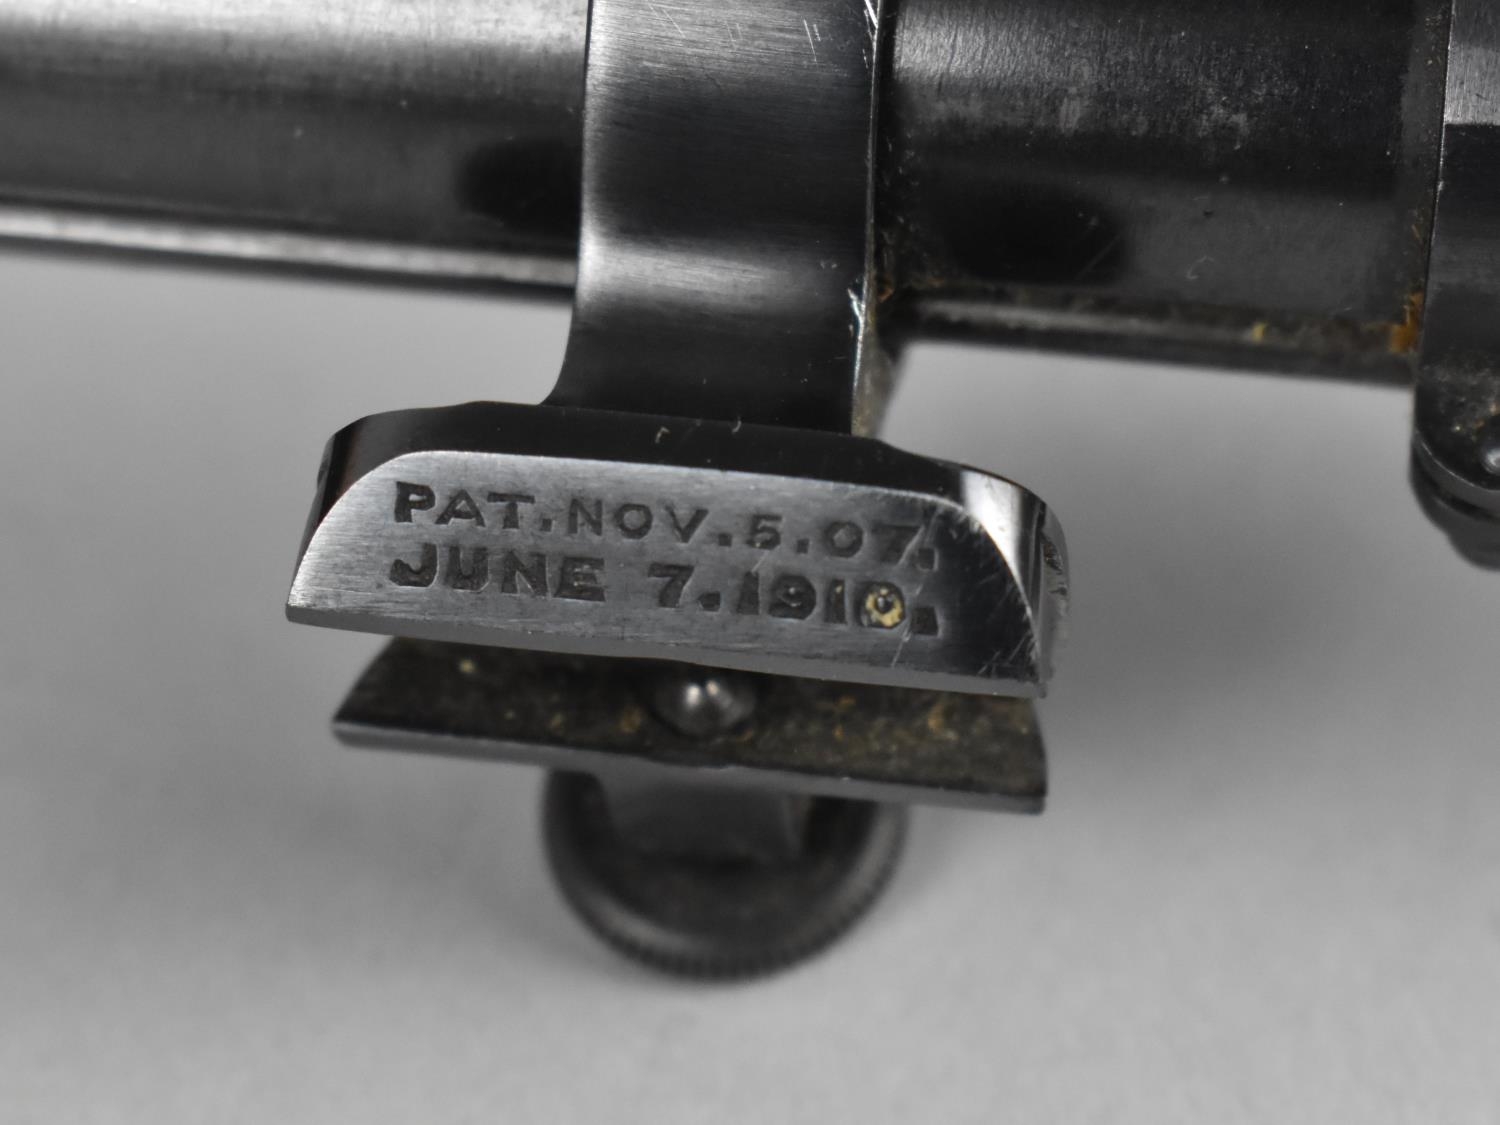 An Early 20th Century Winchester Rifle Long Sight, Patented 5th Nov 1907, Dated June 7th 1910, - Image 6 of 7